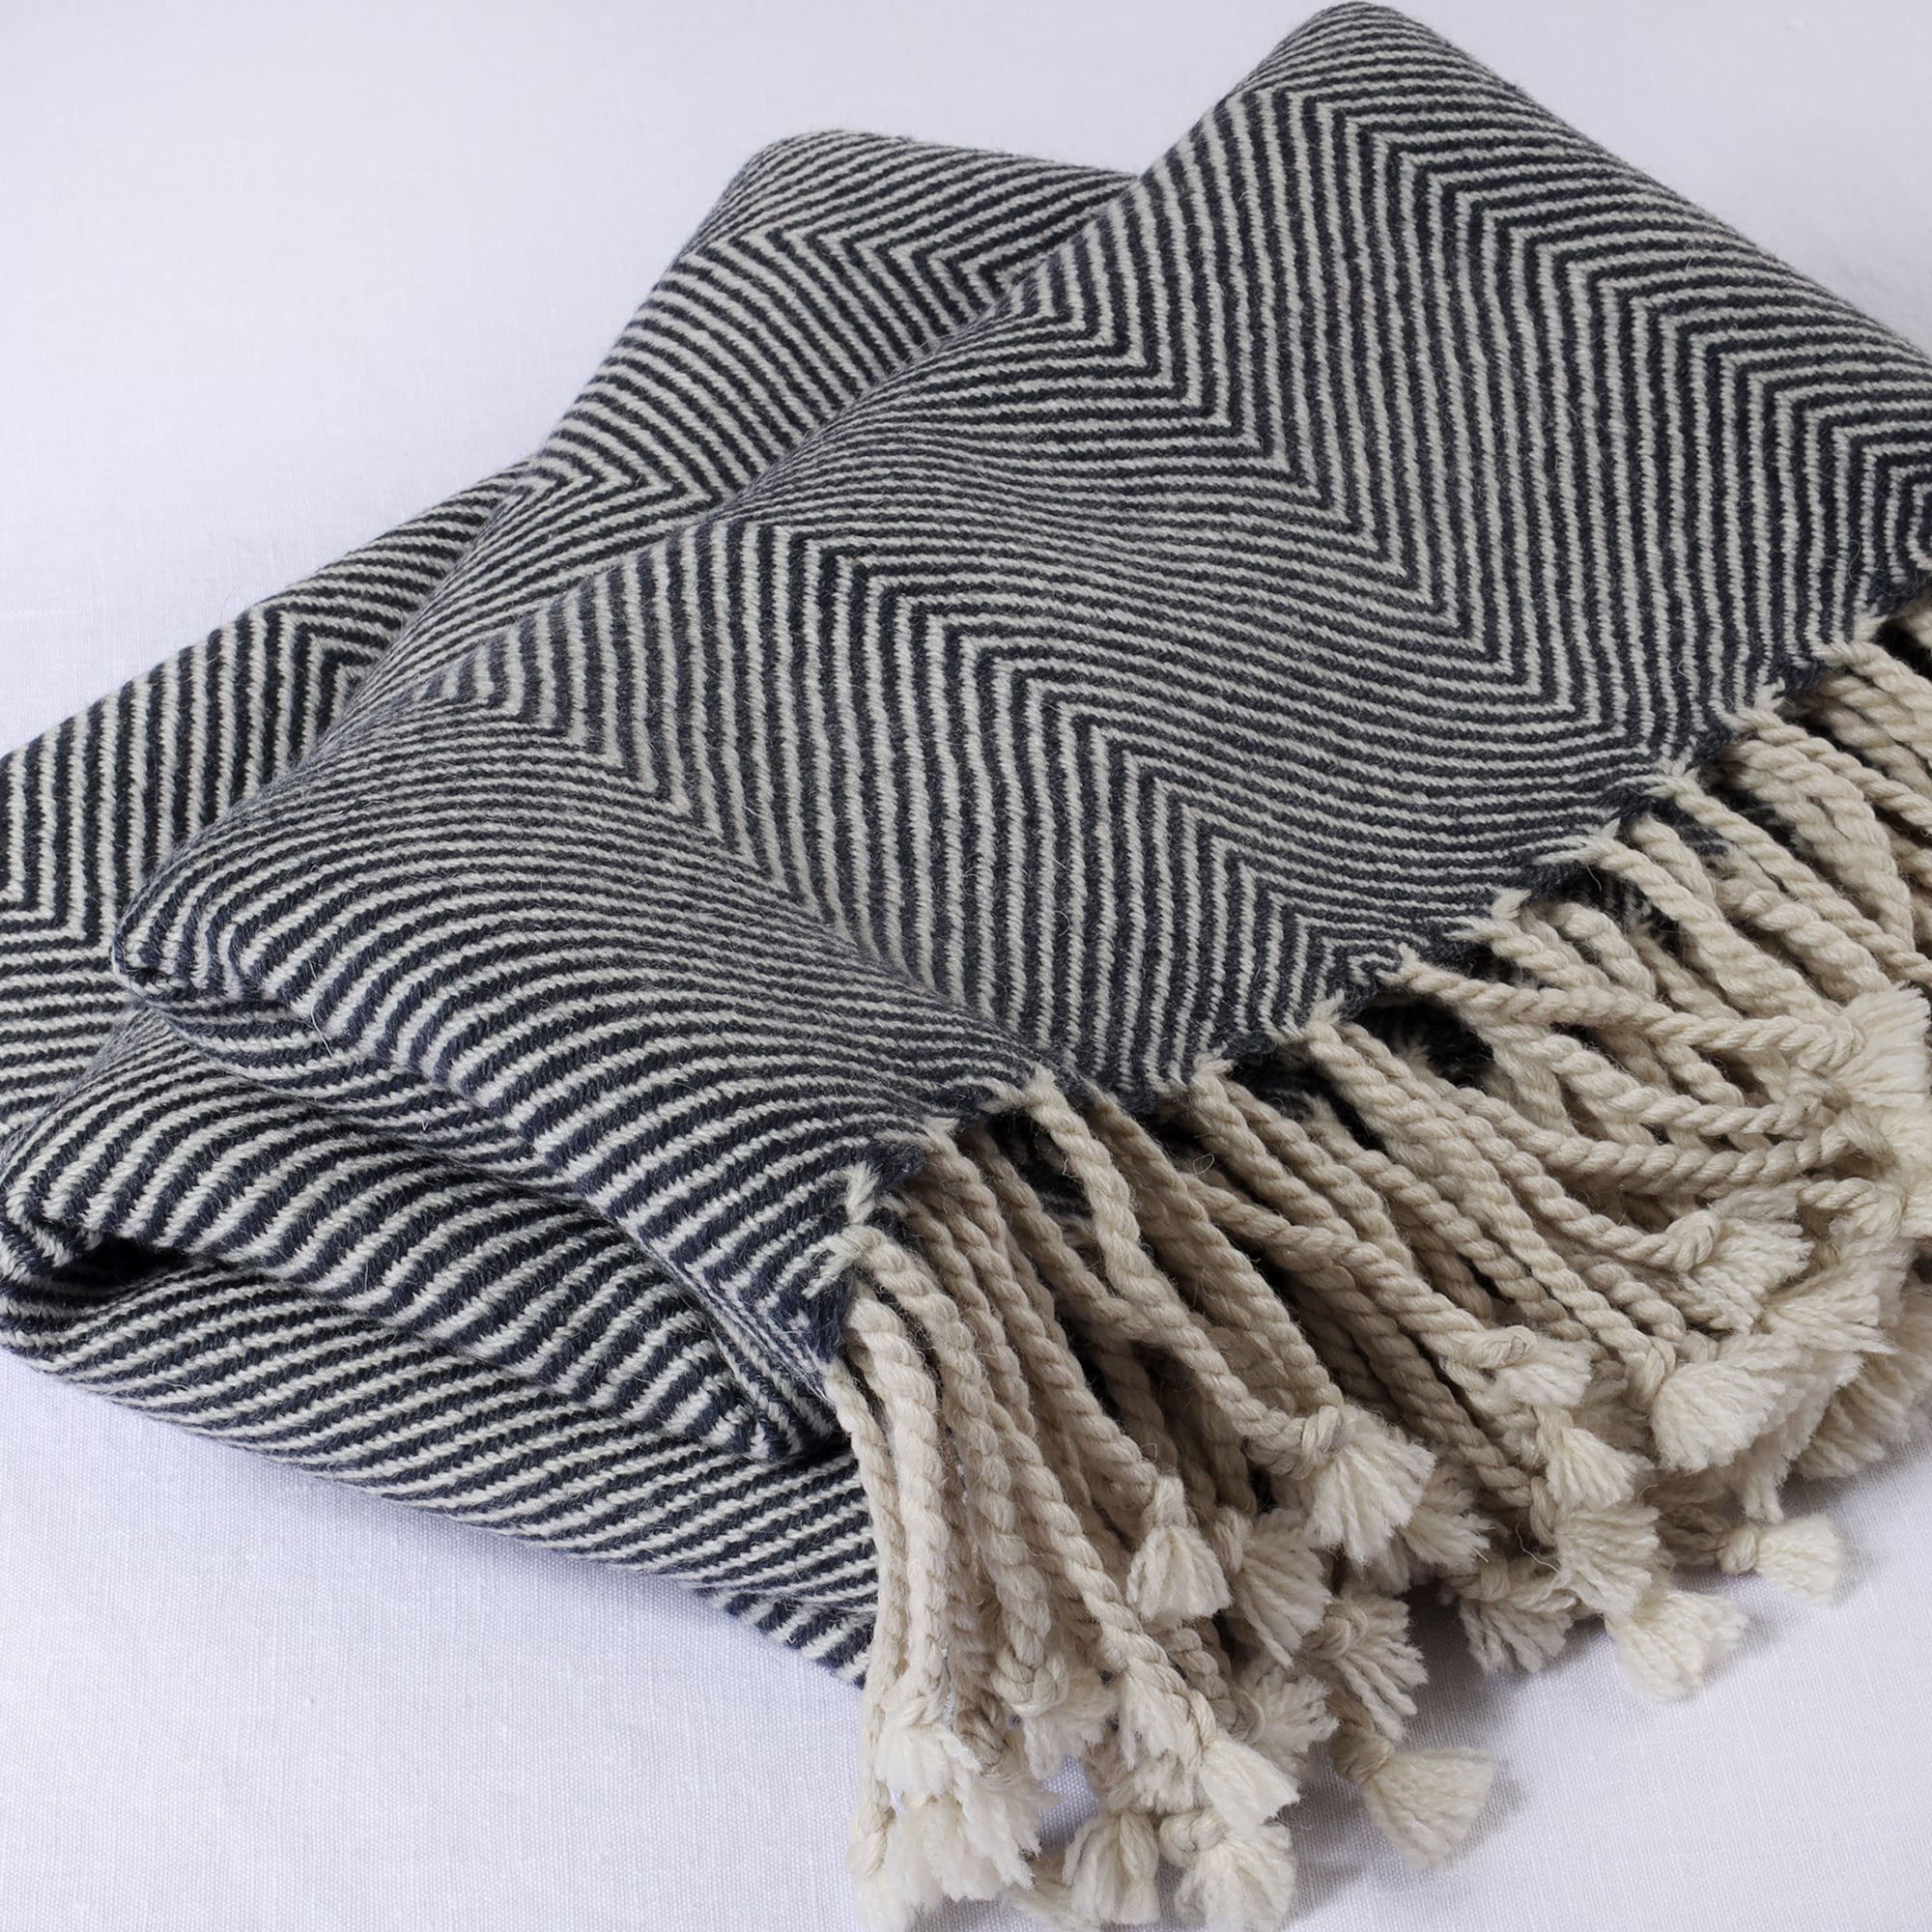 folded navy & cream herringbone throw on a white background showing the weave detail and the knotted tassel fringe 